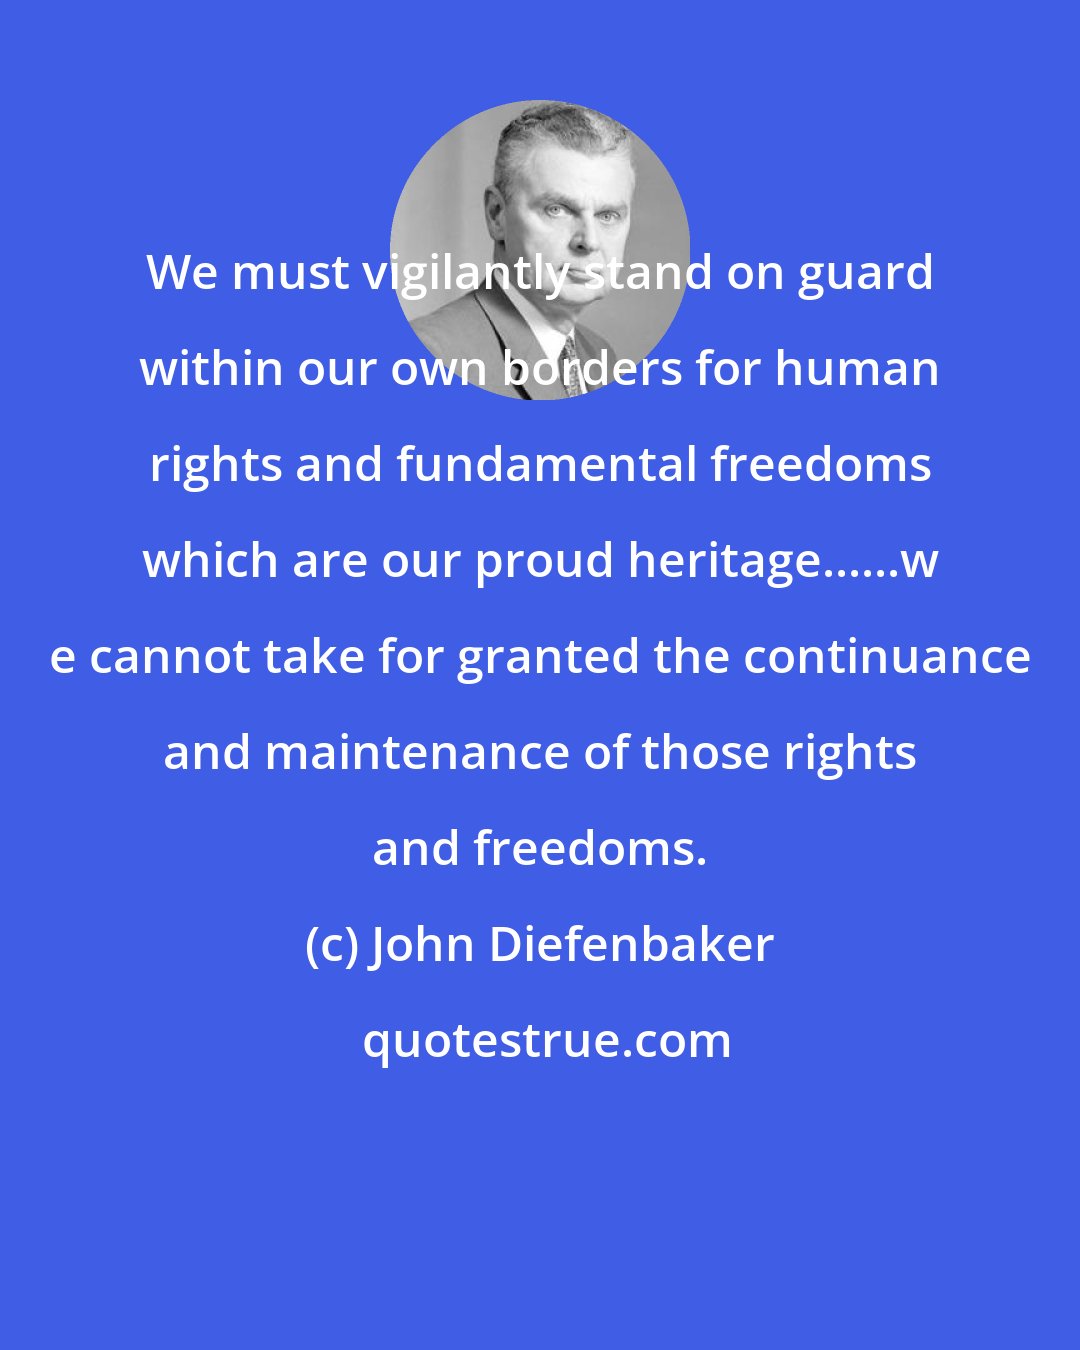 John Diefenbaker: We must vigilantly stand on guard within our own borders for human rights and fundamental freedoms which are our proud heritage......w e cannot take for granted the continuance and maintenance of those rights and freedoms.